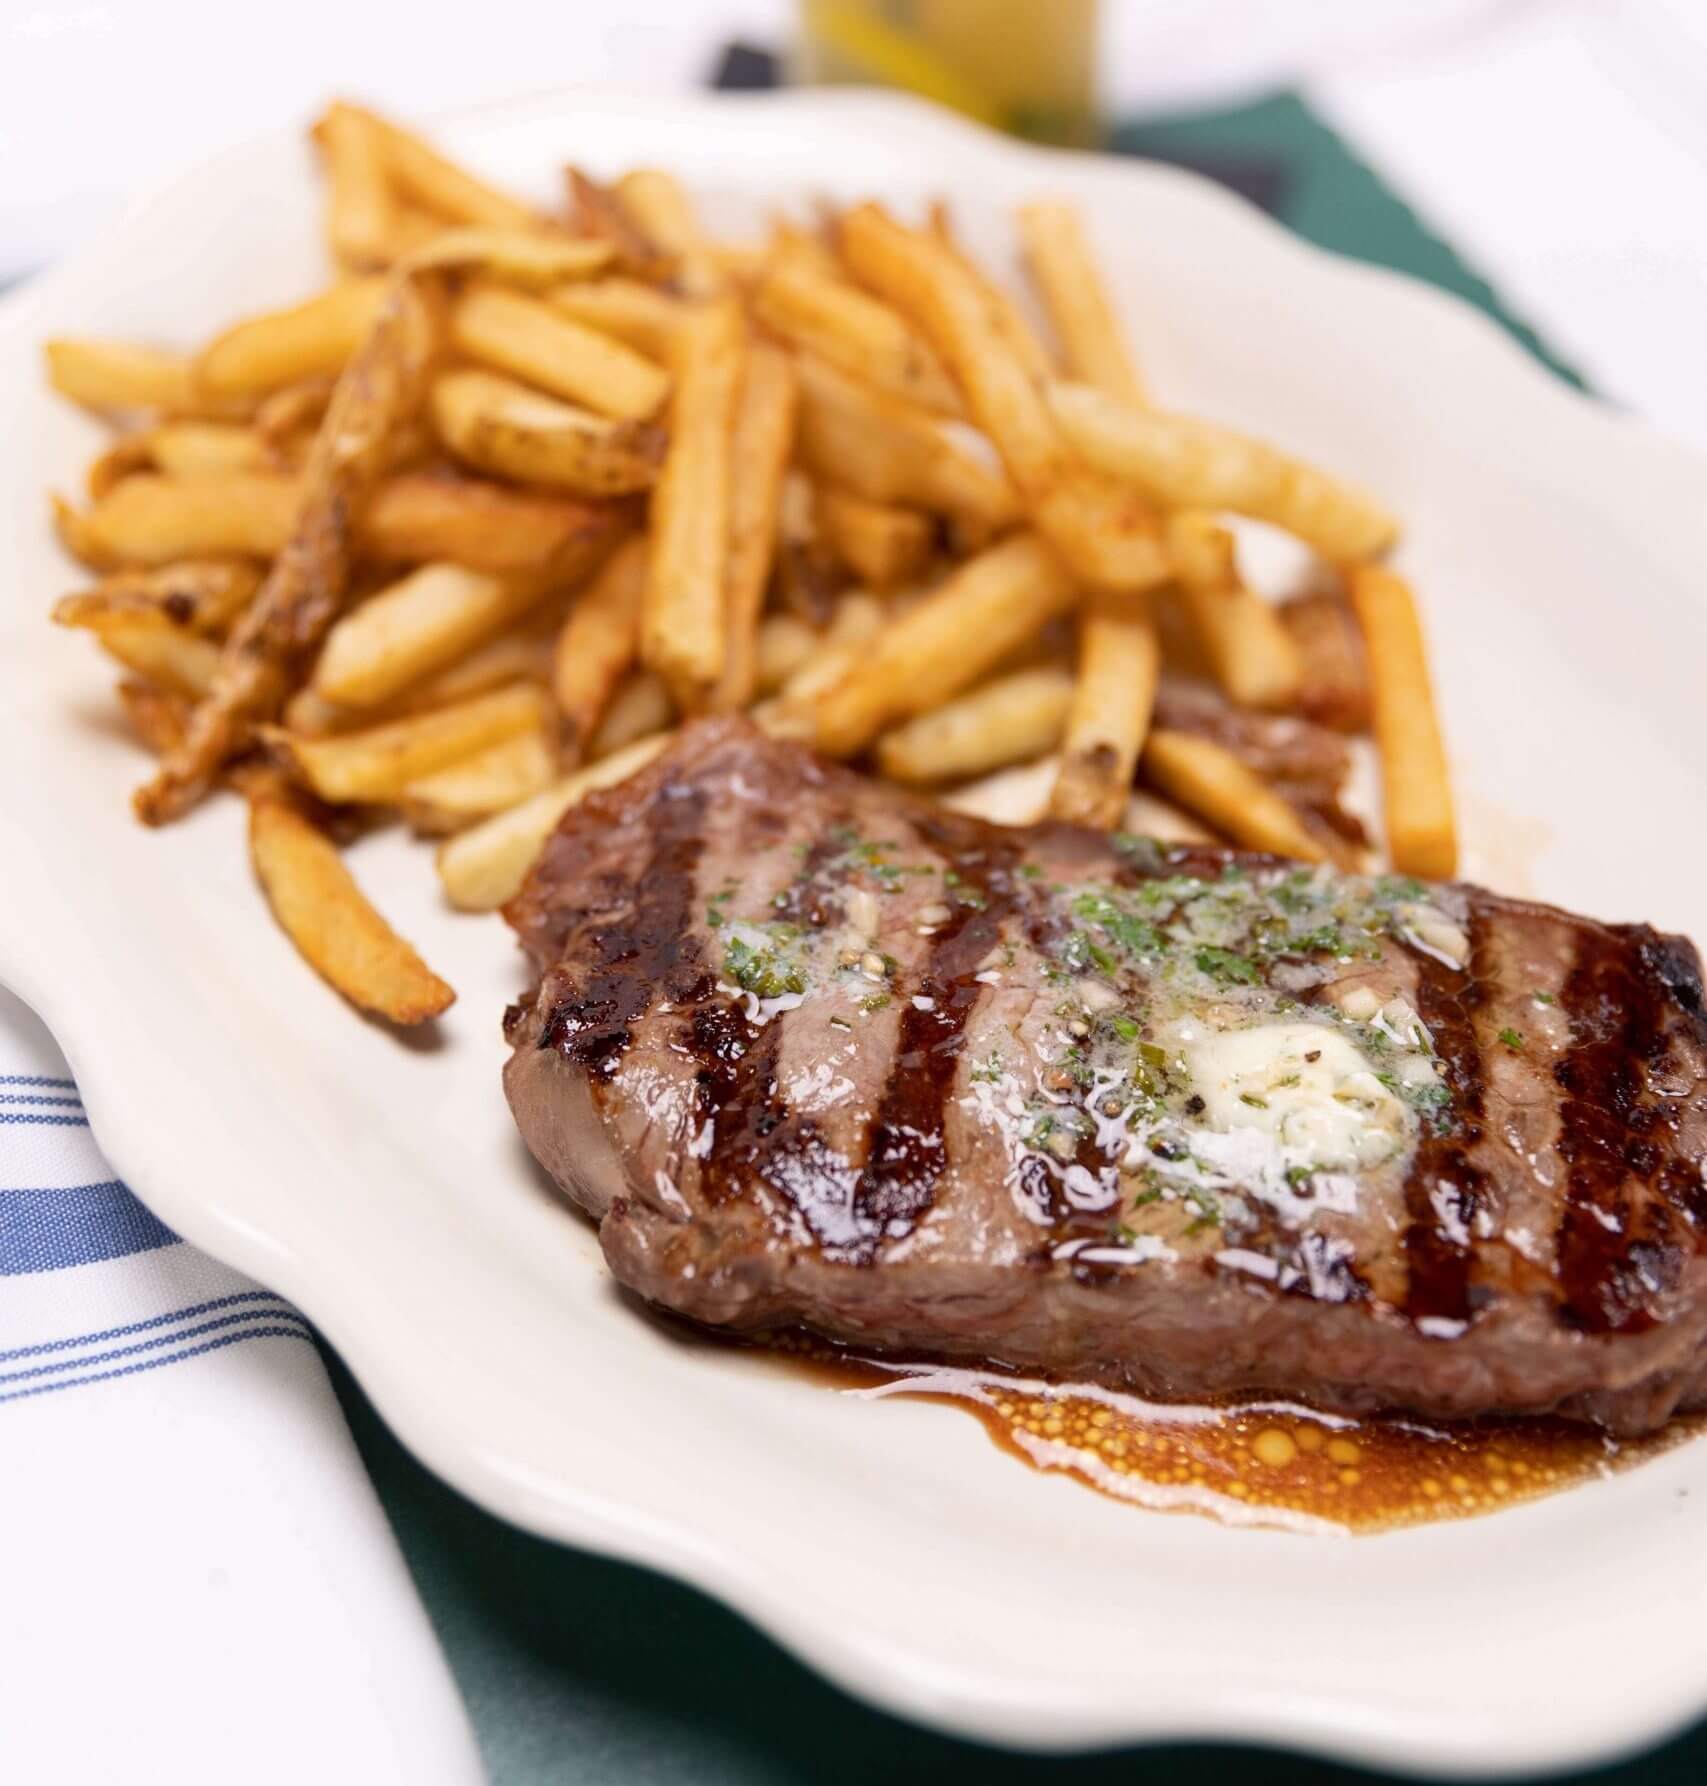 A steak and fries on a white plate